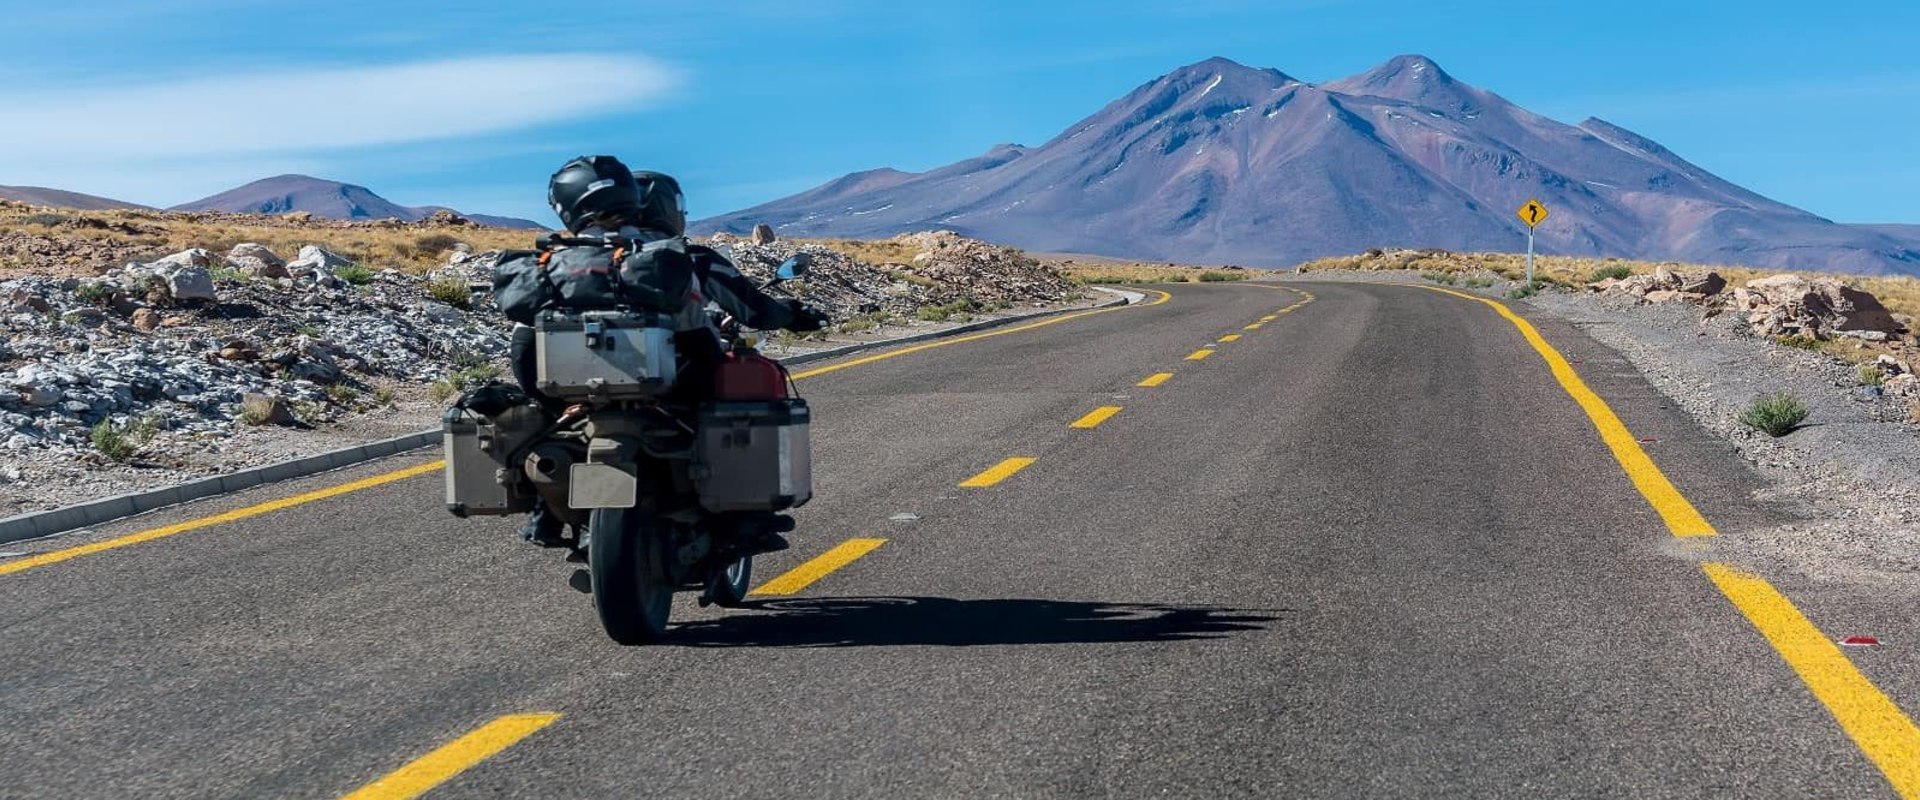 Motorcycle Travel Tips and Destinations: Route Planning and Navigation